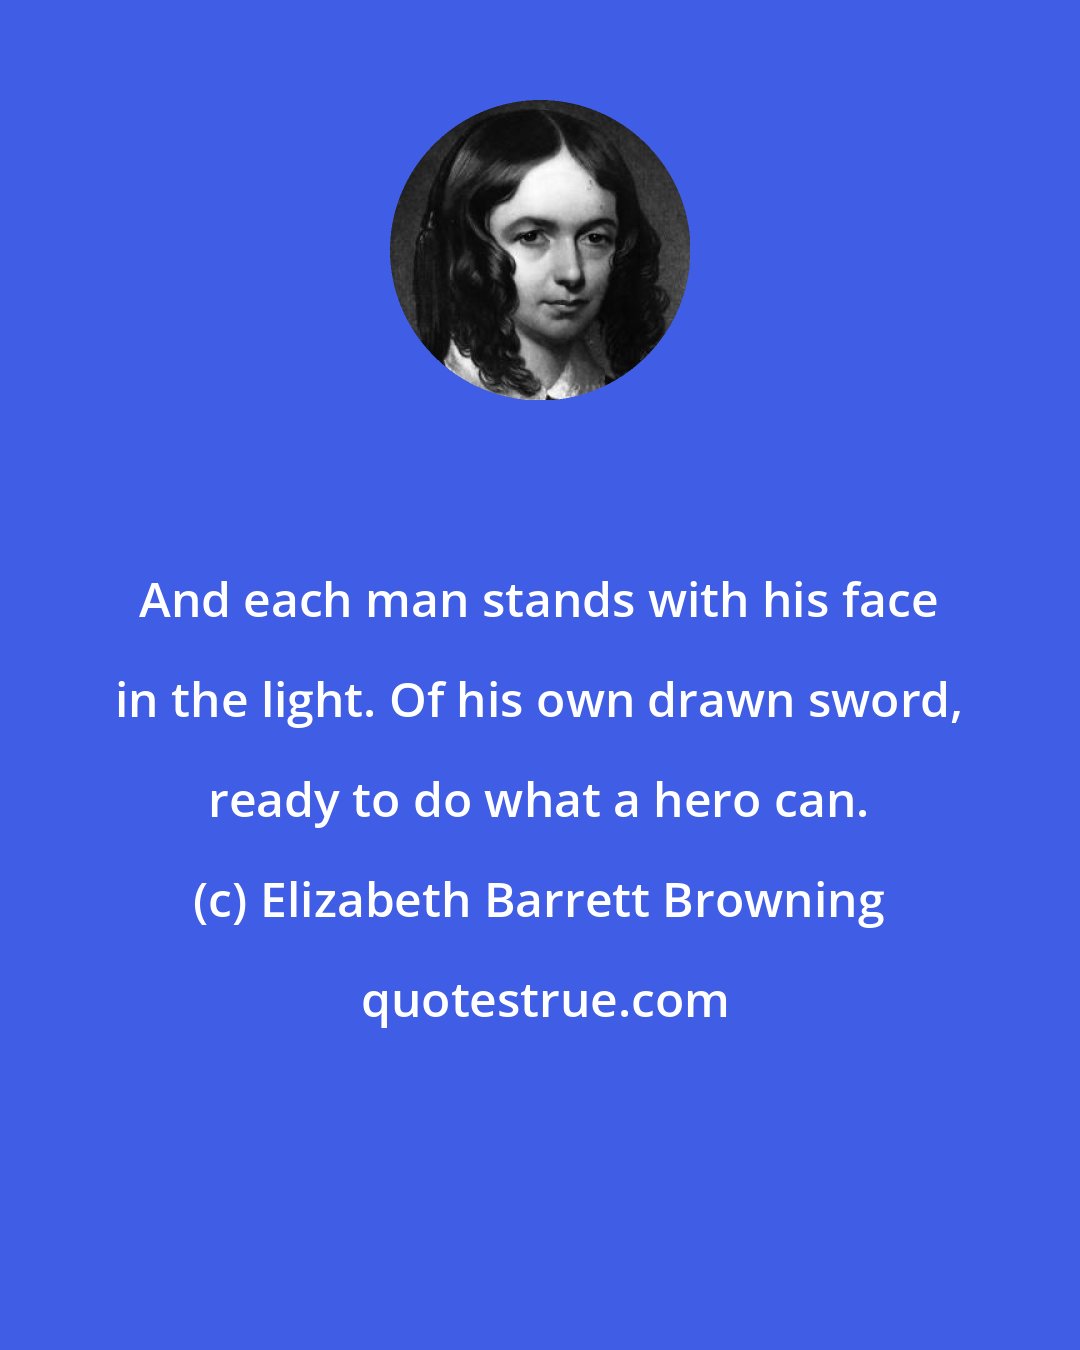 Elizabeth Barrett Browning: And each man stands with his face in the light. Of his own drawn sword, ready to do what a hero can.